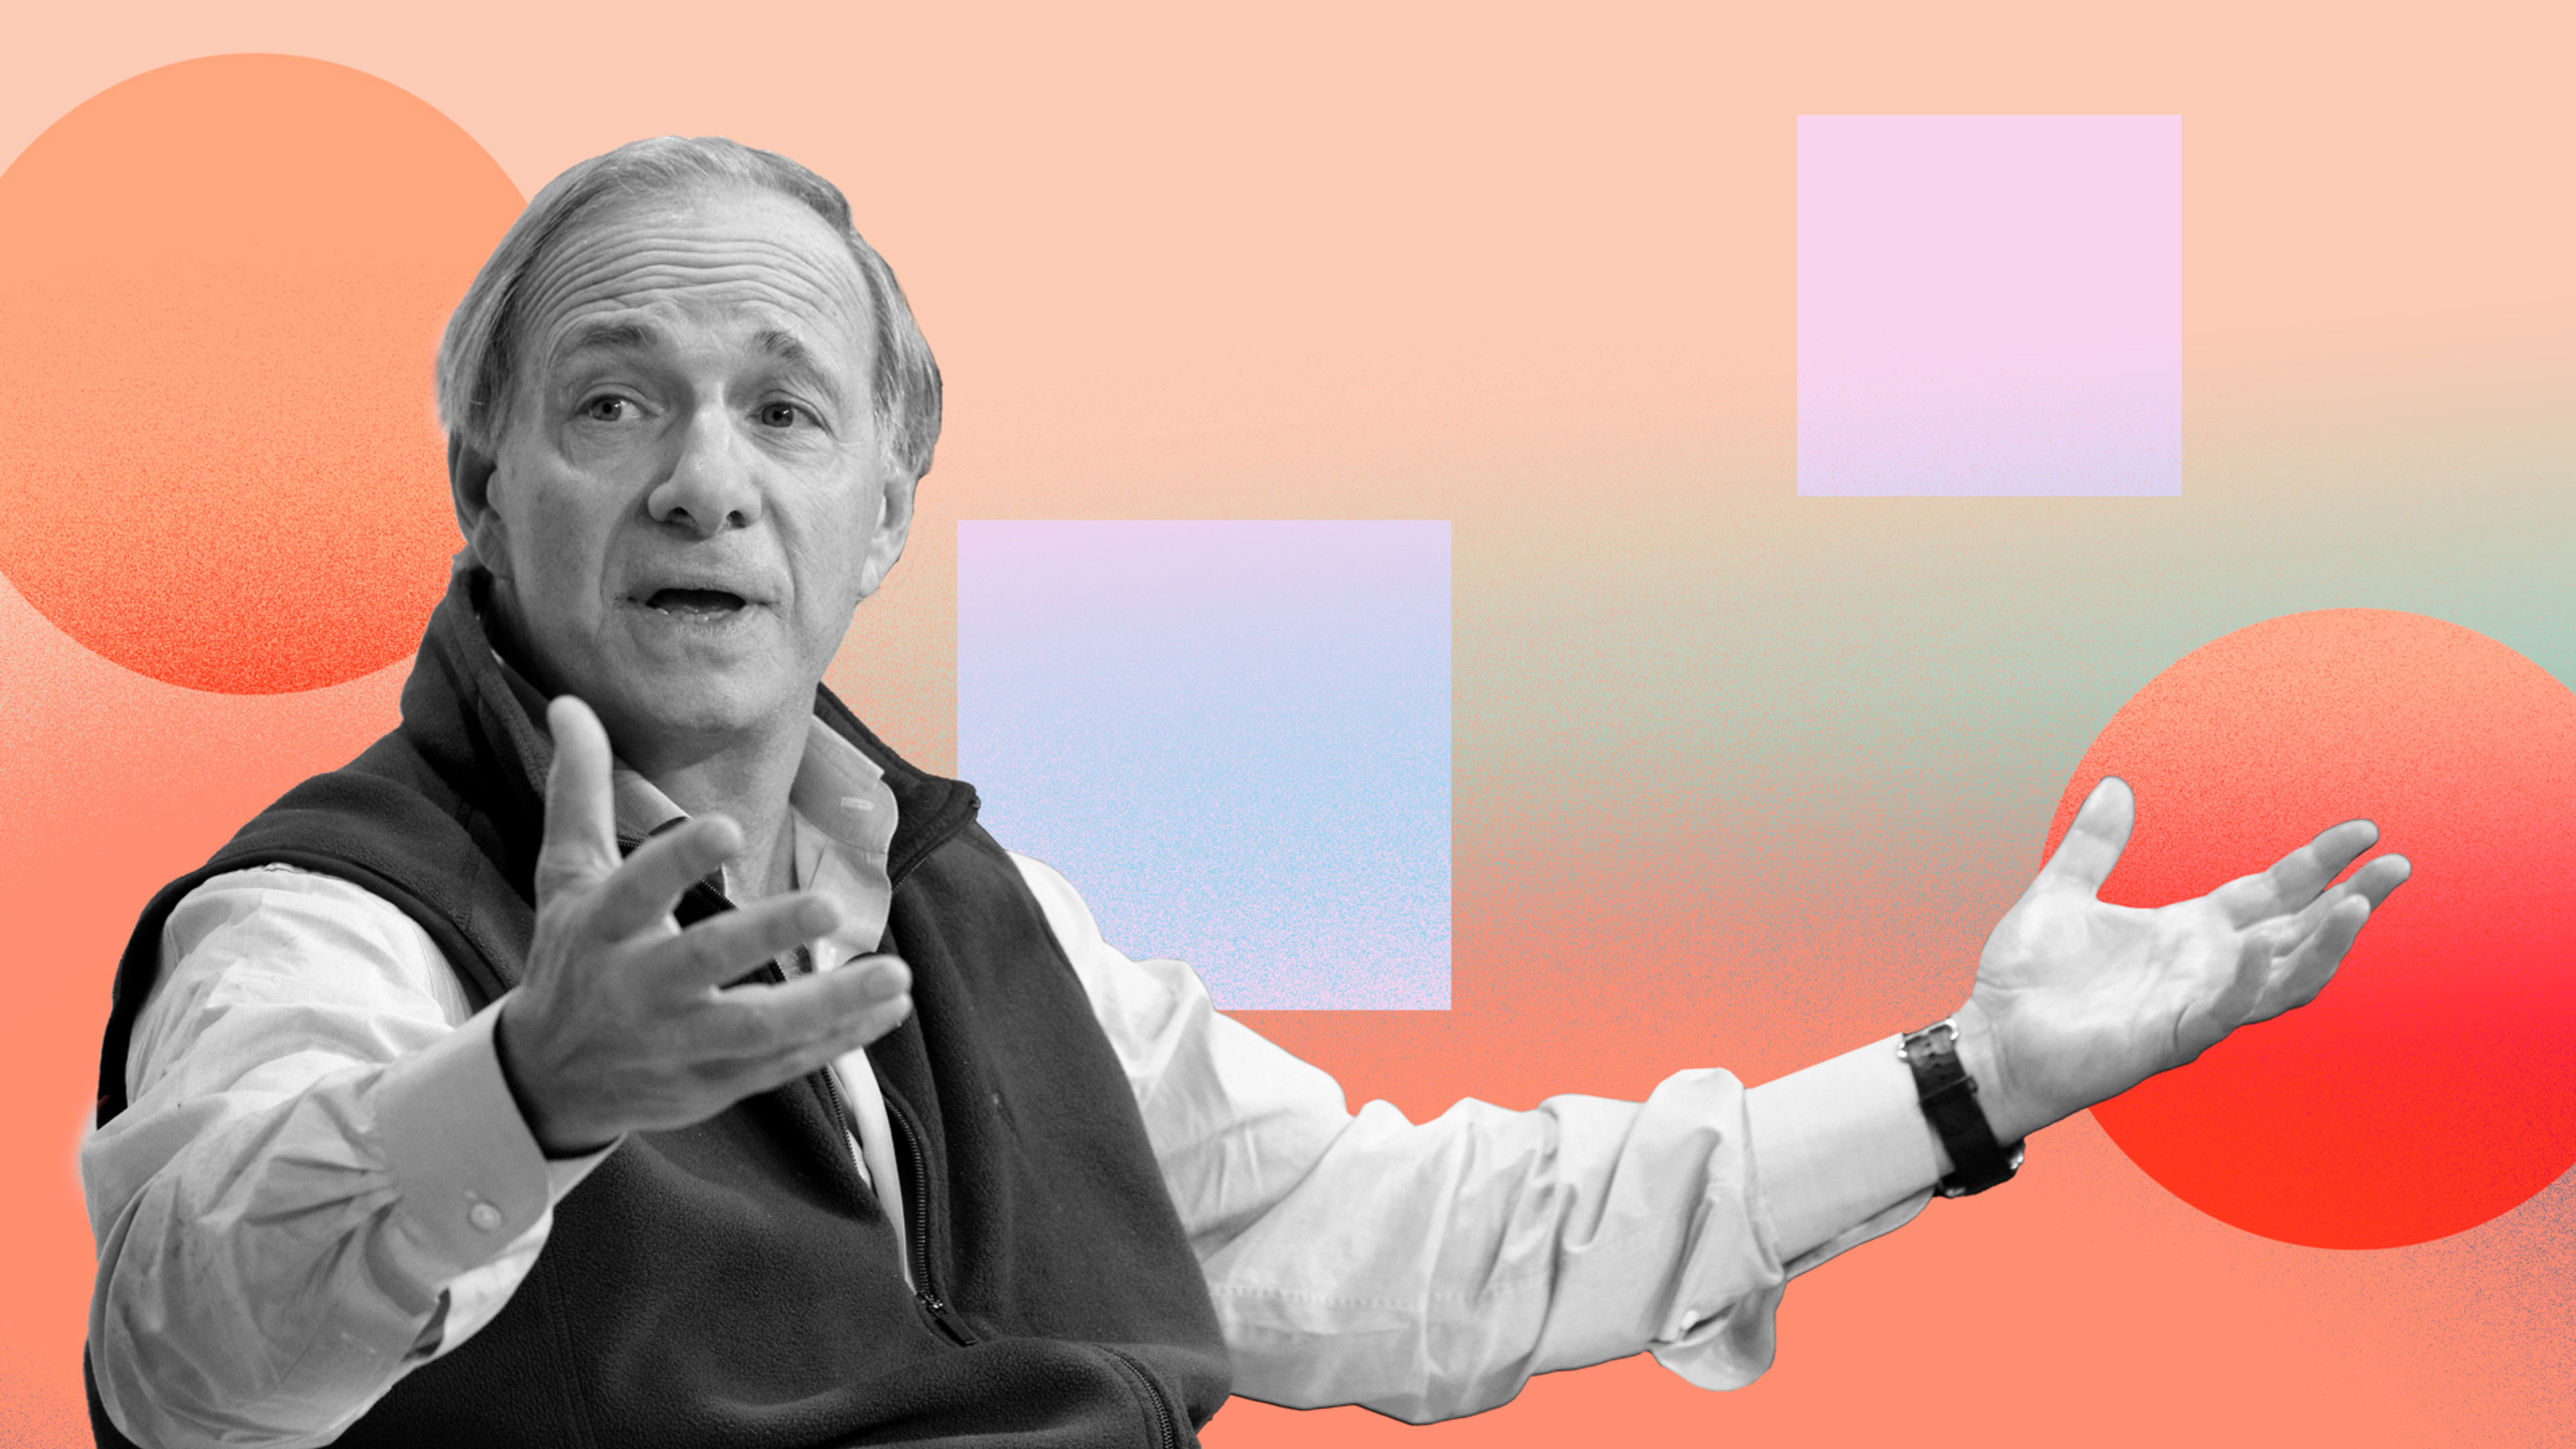 Ray Dalio, quiz king of Bridgewater, wants to help you find yourself